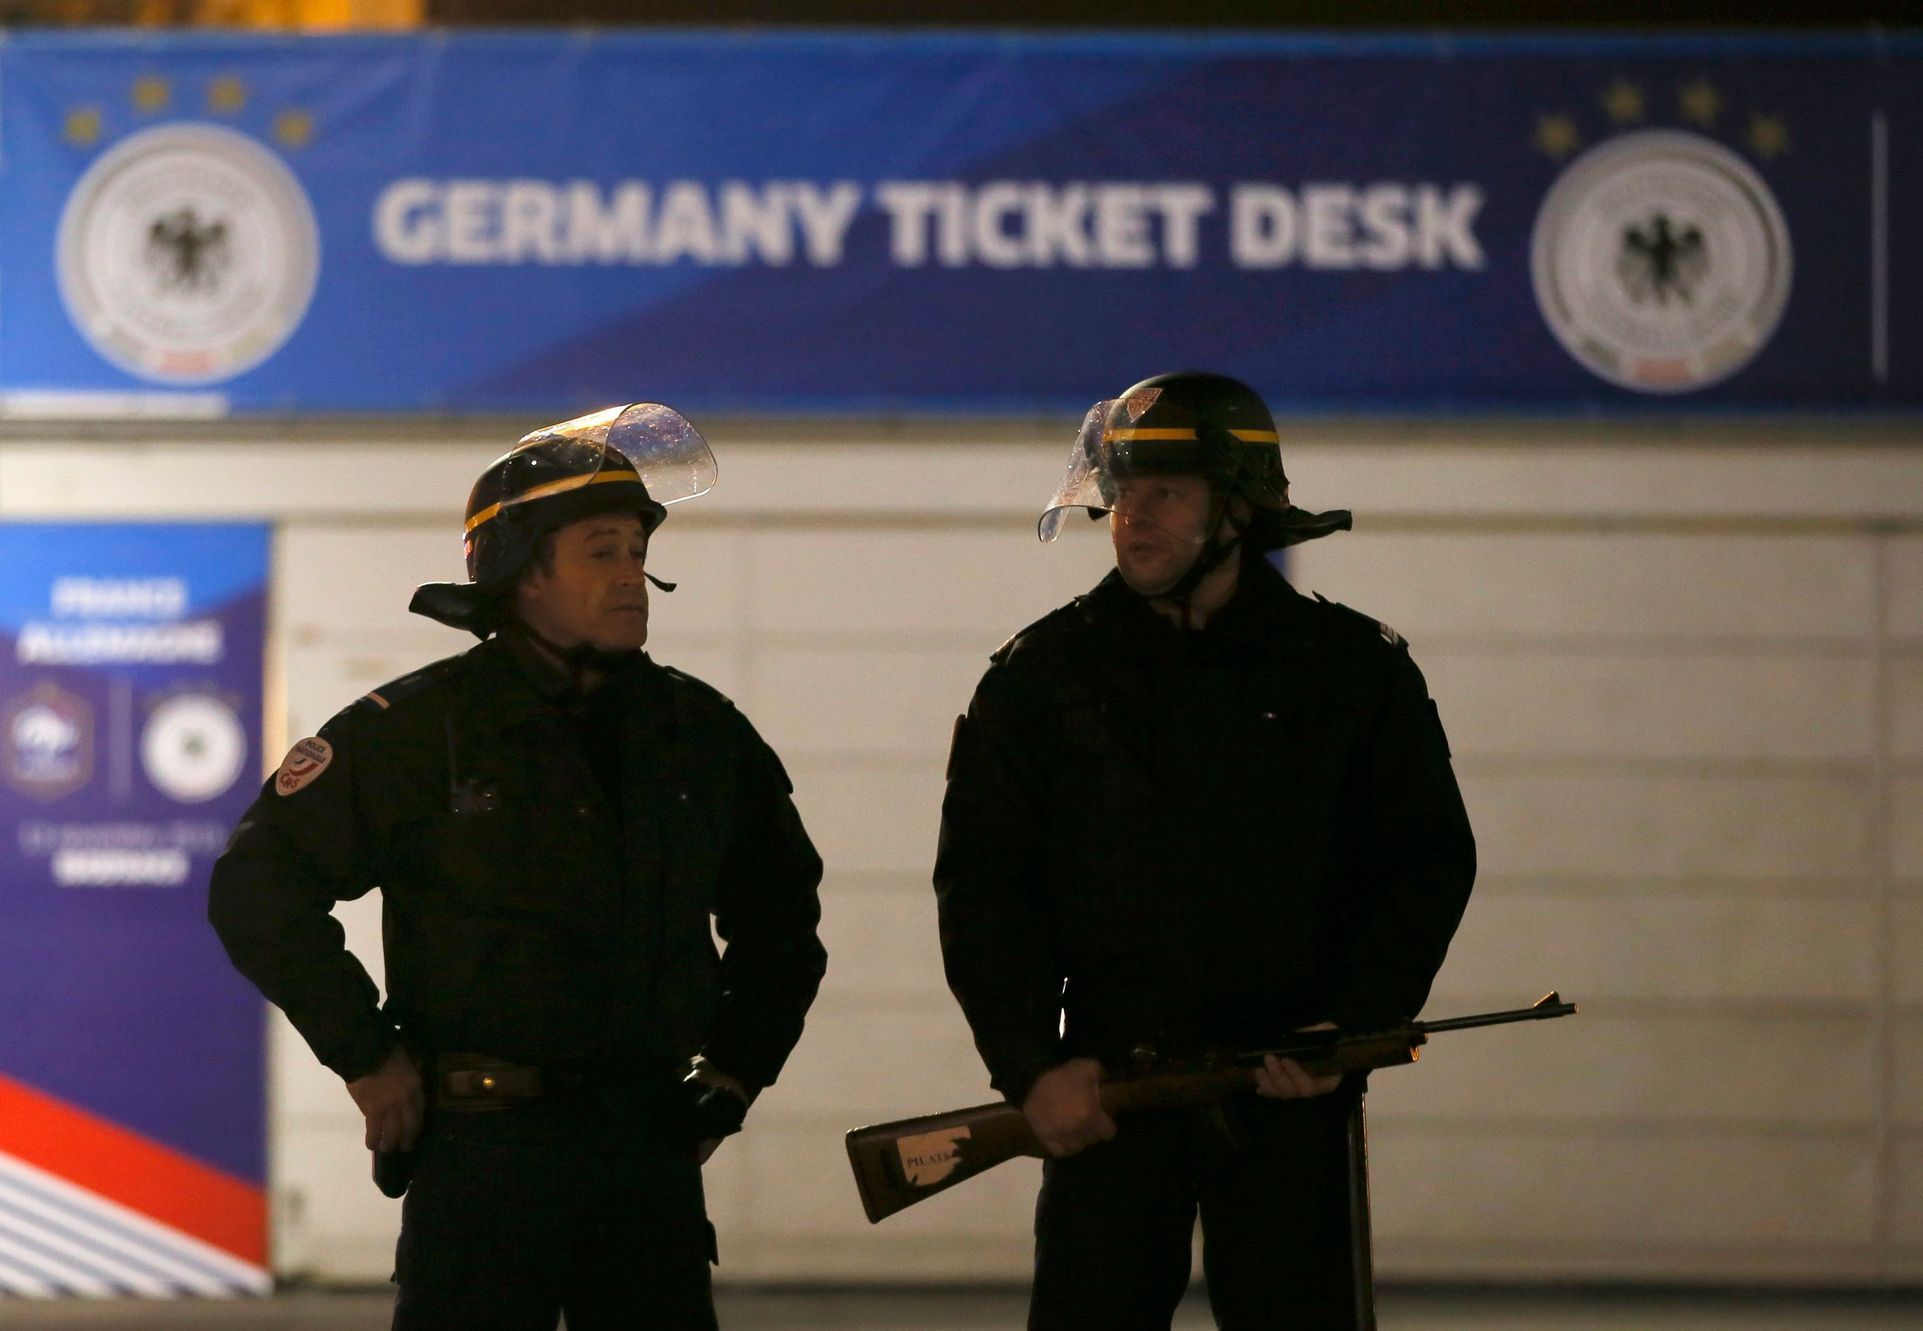 Police stand outside the Stade de France soccer stadium where explosions were reported during the France vs German friendly match